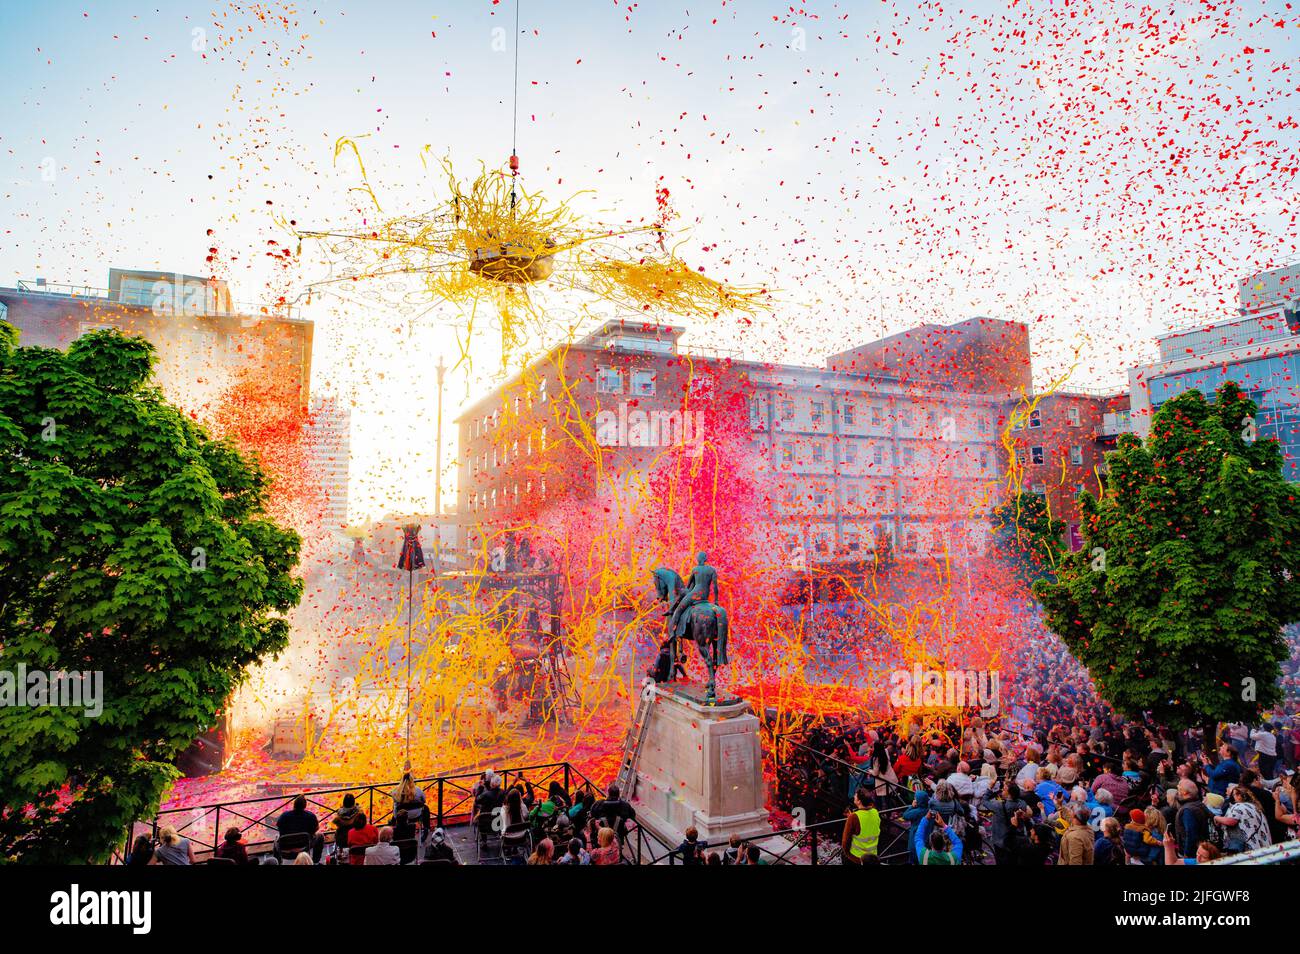 The finale to an outdoor performance in Coventry City Centre. The Awakening by Gratte Ciel included colourful confetti and streamers being fired. Stock Photo